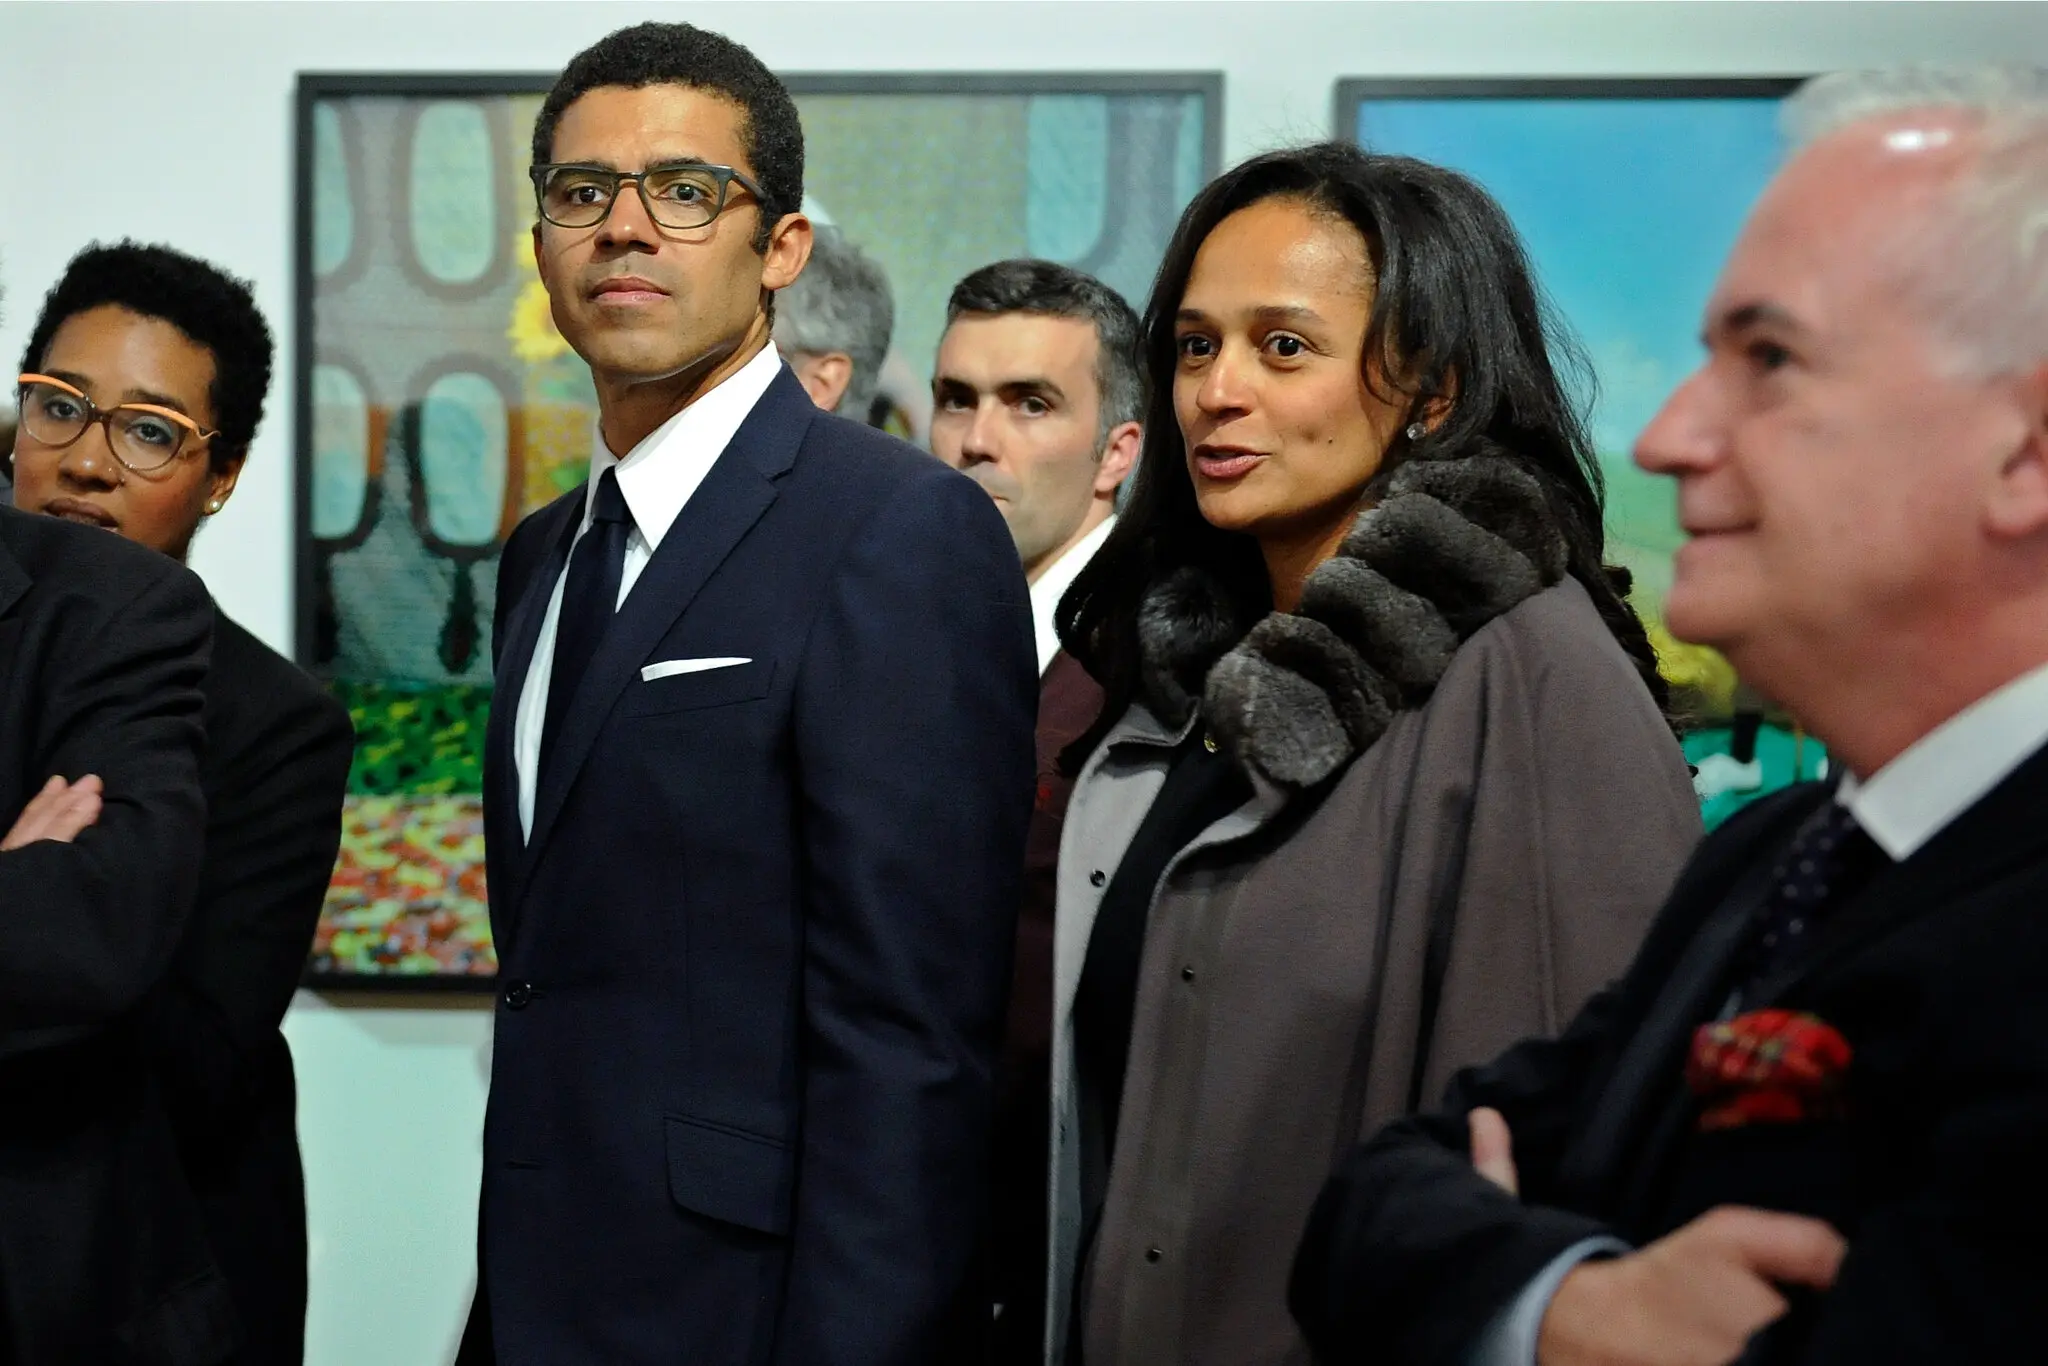 Top Art Philanthropists in Africa | Mr. Dokolo and his wife, Isabel dos Santos, at an art exhibition in Portugal in 2015. © Duarte/Associated Press